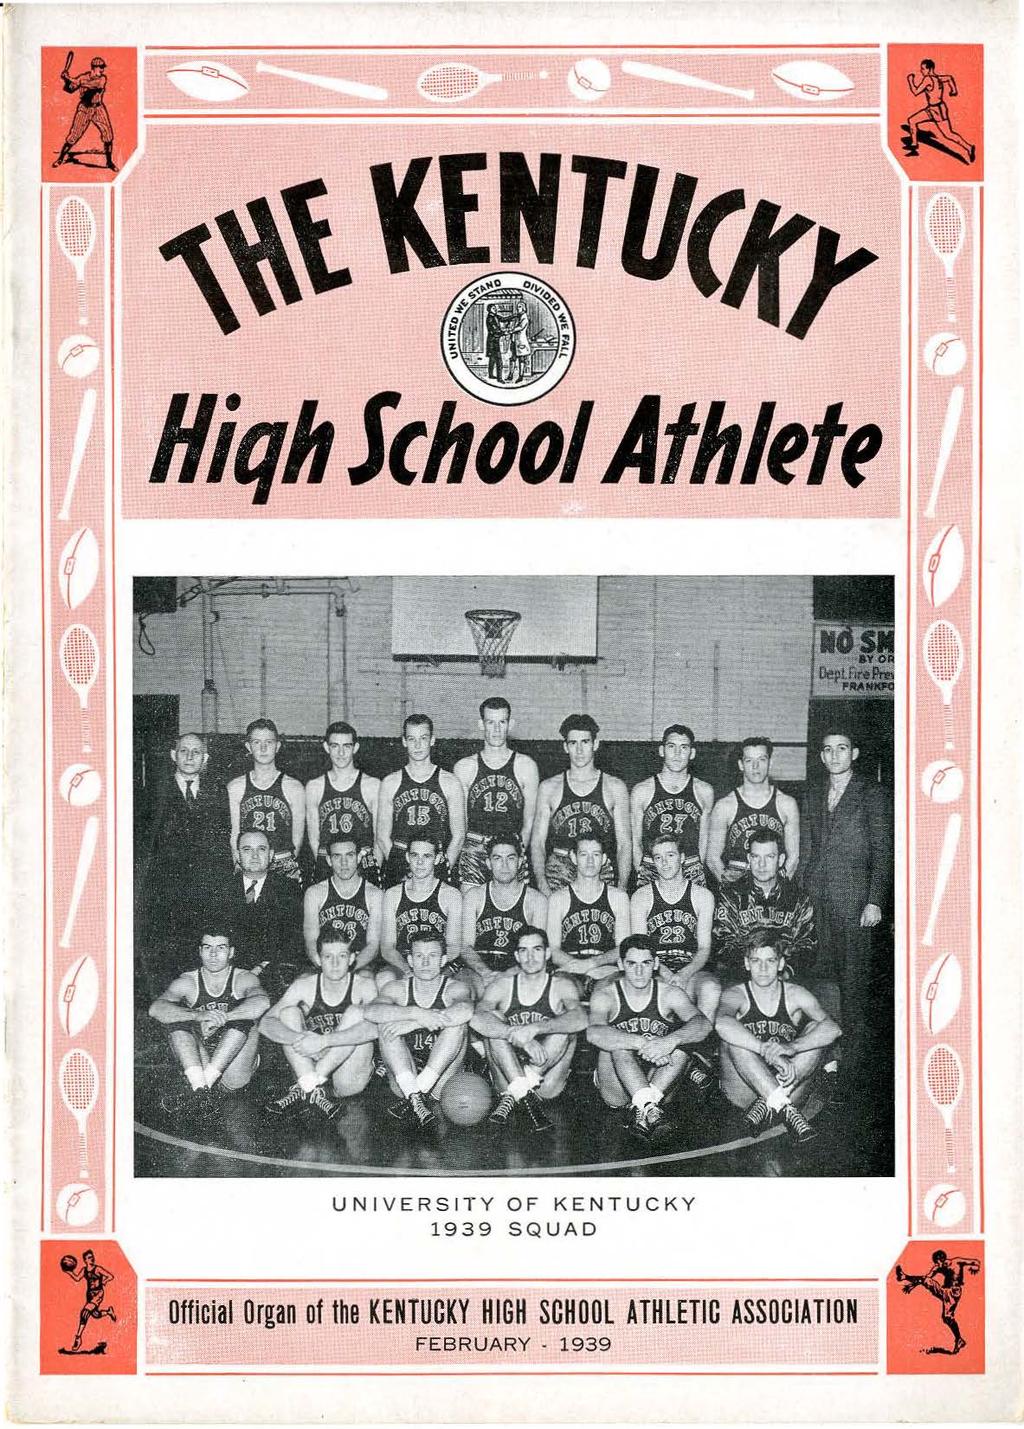 UNVERS T Y OF KENTUCKY 1939 SQUAD Offcal Organ of the